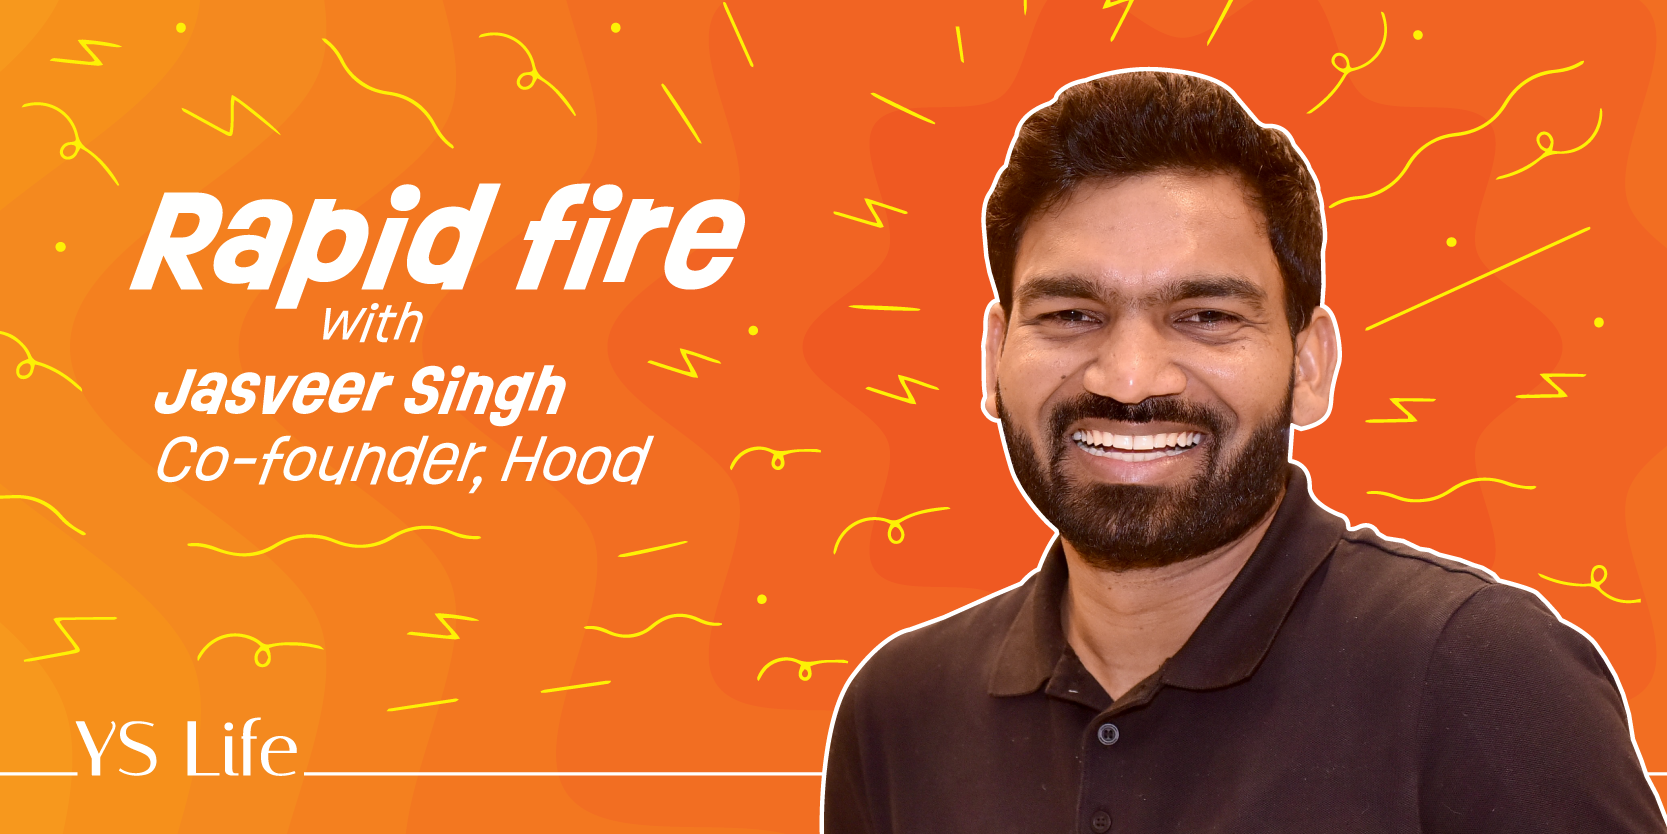 Rapid fire with YS Life: Jasveer Singh, Co-founder of Hood 